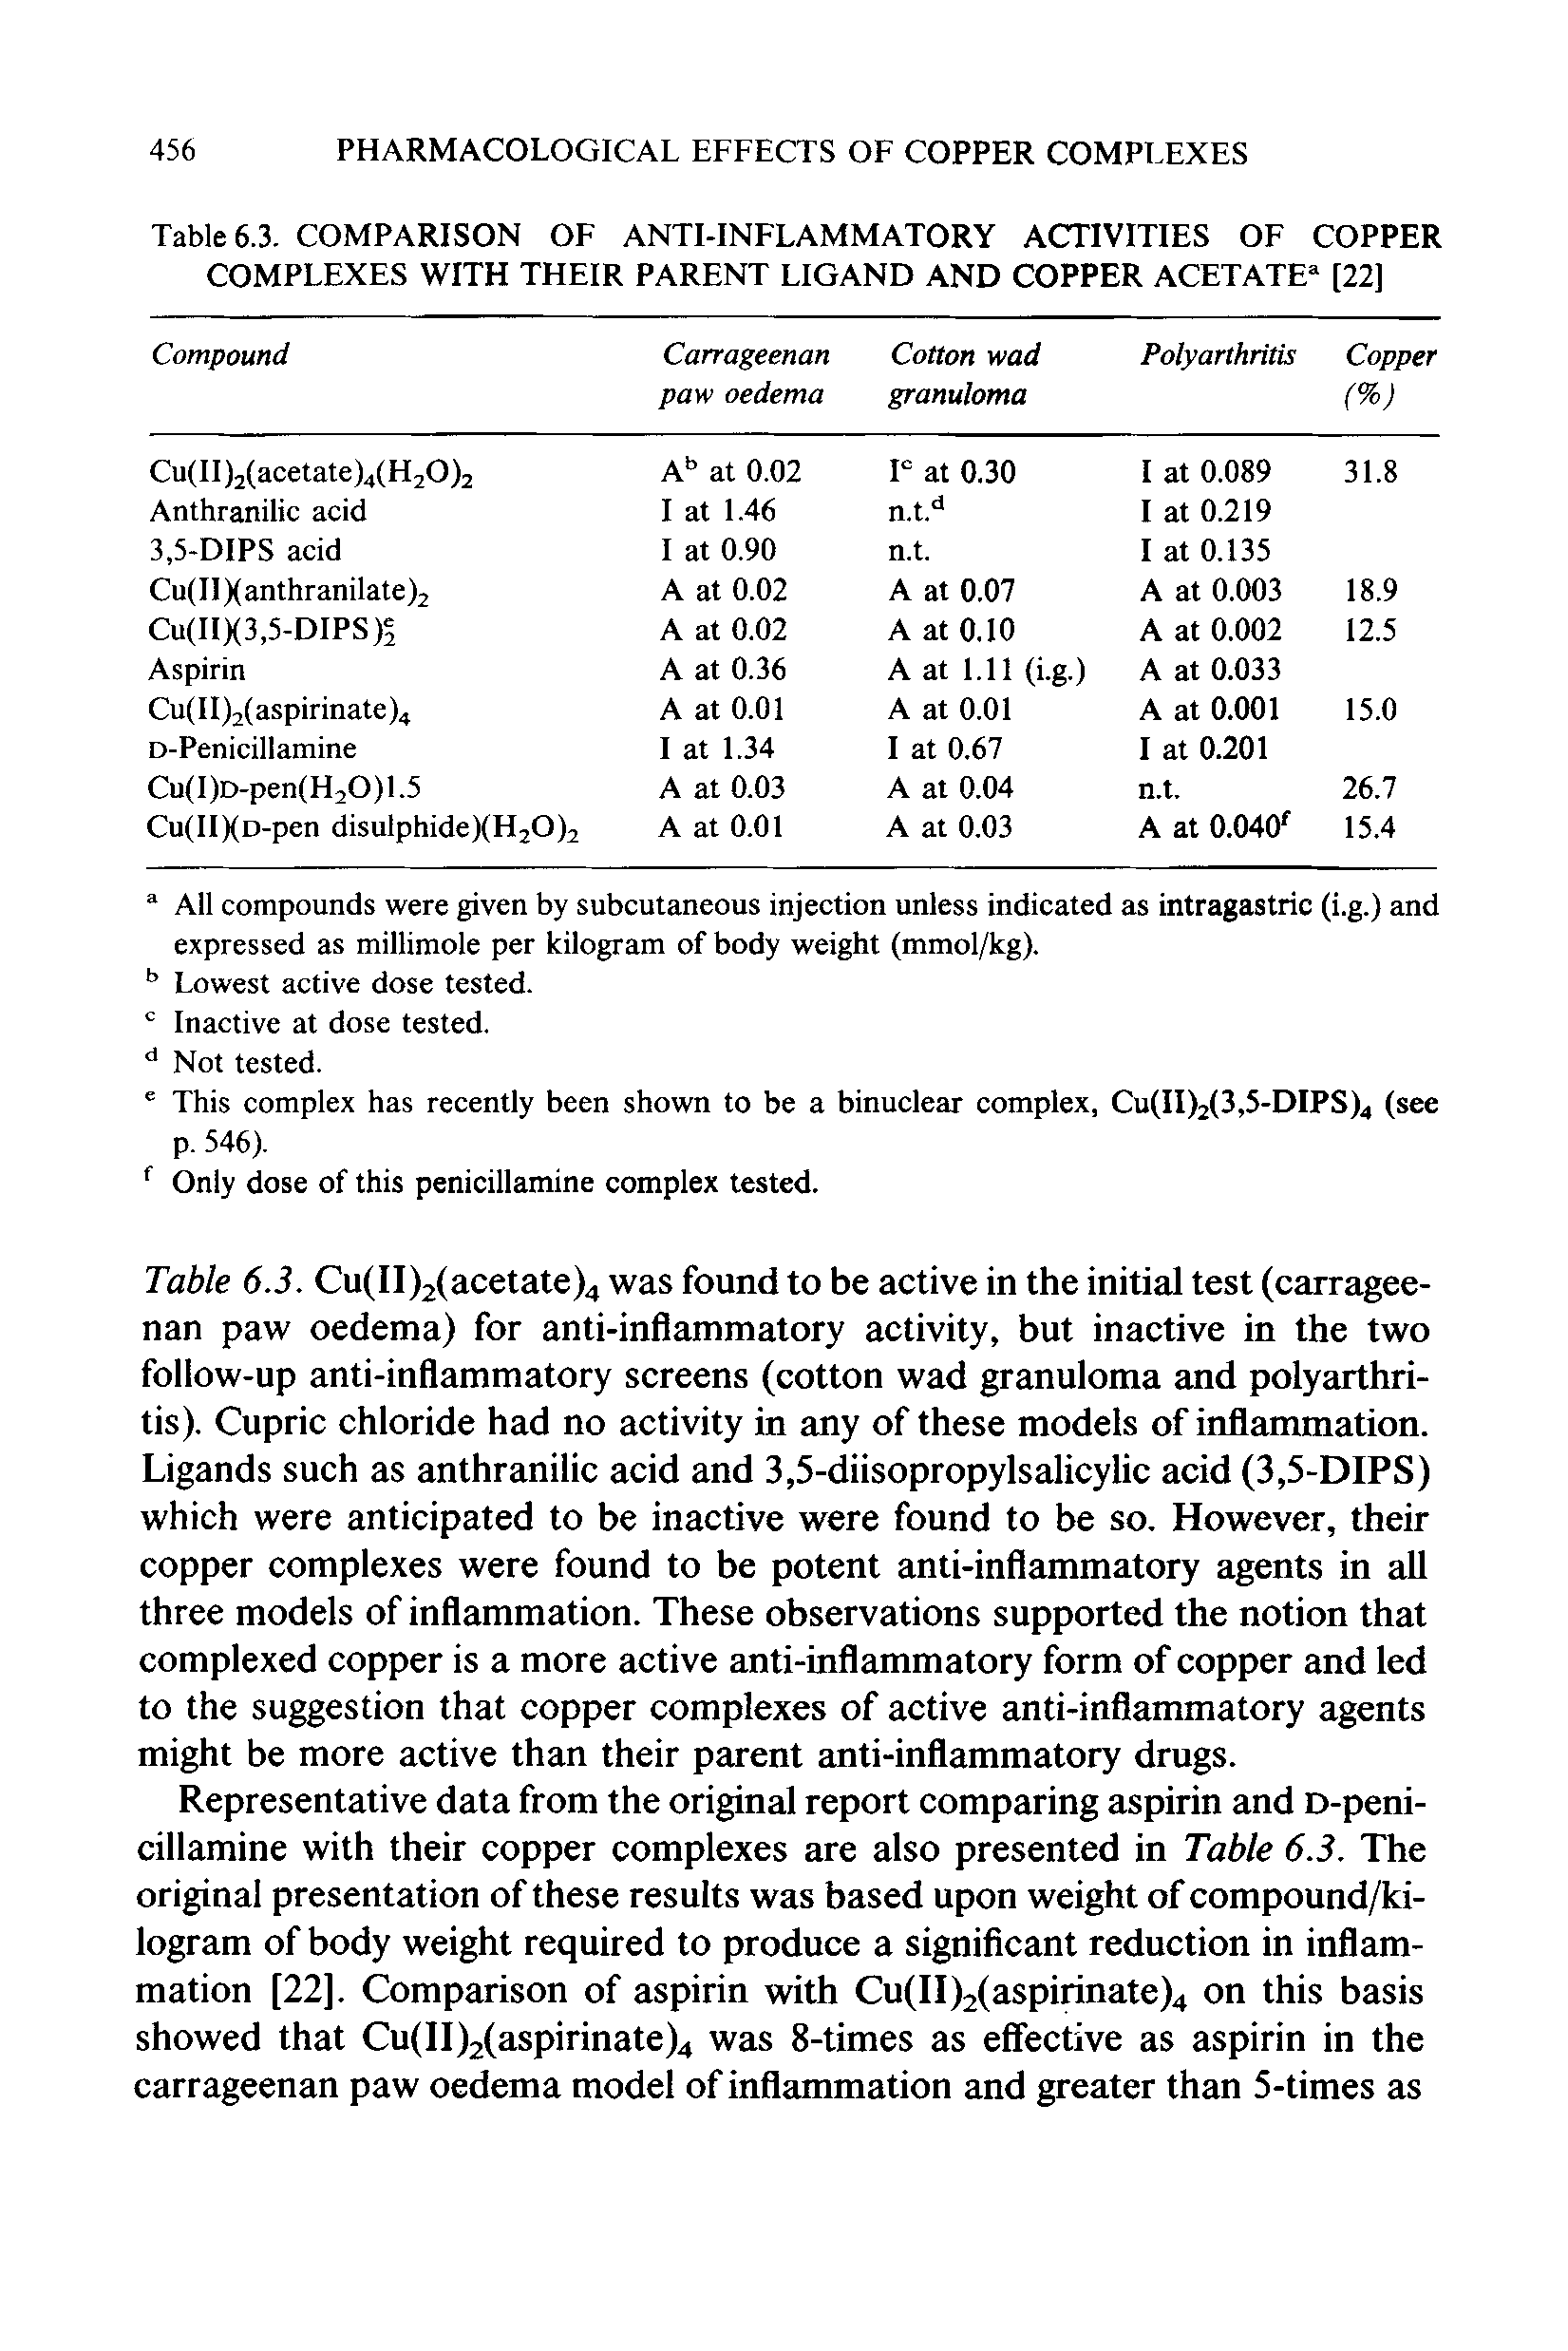 Table 6.3. Cu(II)2(acetate)4 was found to be active in the initial test (carrageenan paw oedema) for anti-inflammatory activity, but inactive in the two follow-up anti-inflammatory screens (cotton wad granuloma and polyarthritis). Cupric chloride had no activity in any of these models of inflammation. Ligands such as anthranilic acid and 3,5-diisopropylsalicylic acid (3,5-DIPS) which were anticipated to be inactive were found to be so. However, their copper complexes were found to be potent anti-inflammatory agents in all three models of inflammation. These observations supported the notion that complexed copper is a more active anti-inflammatory form of copper and led to the suggestion that copper complexes of active anti-inflammatory agents might be more active than their parent anti-inflammatory drugs.